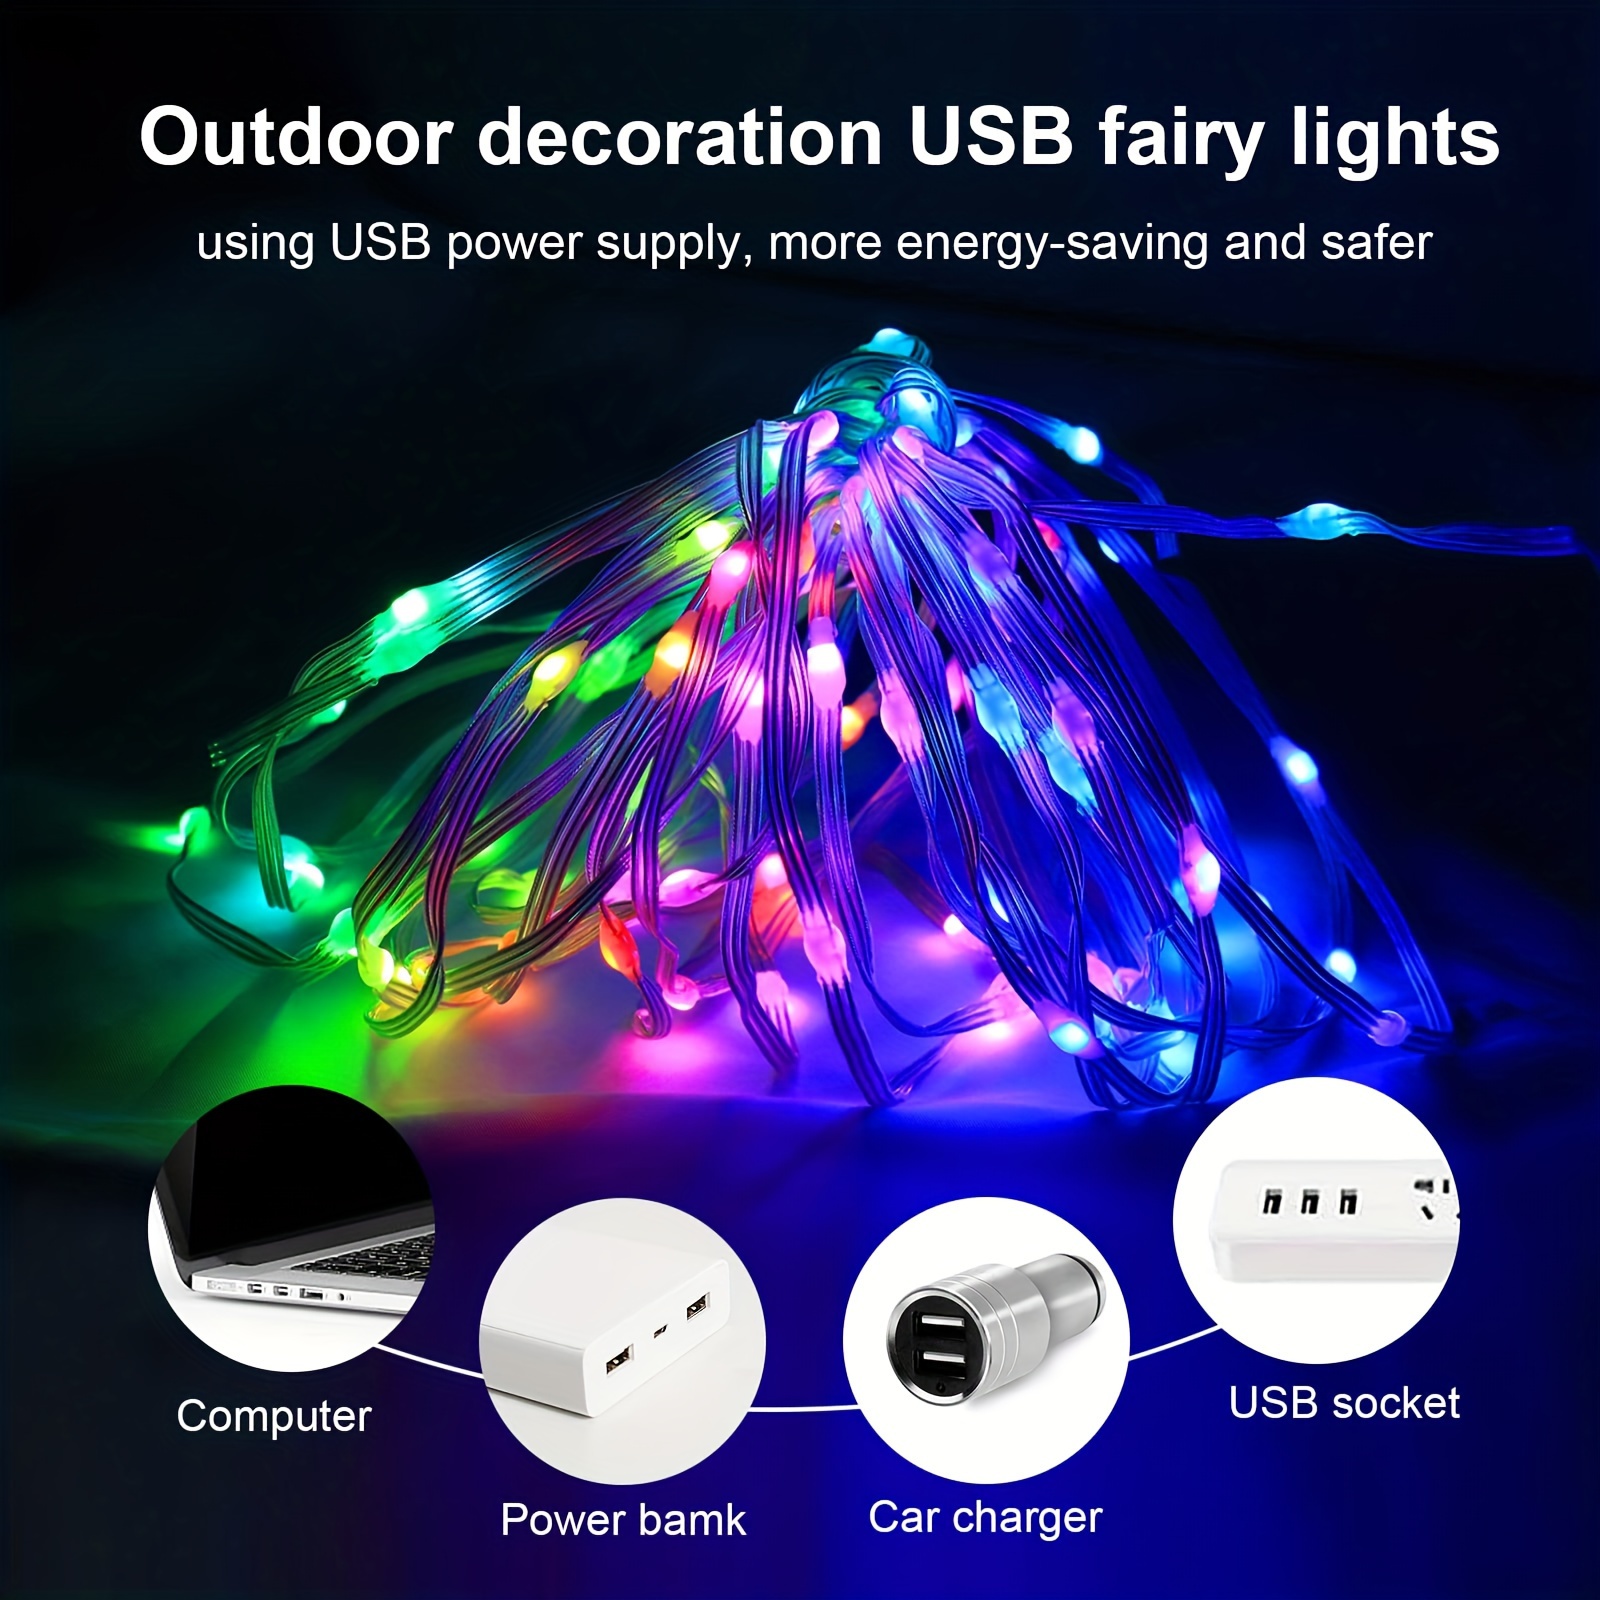 LED String Lights with Weatherproof Technology, Dimmable with